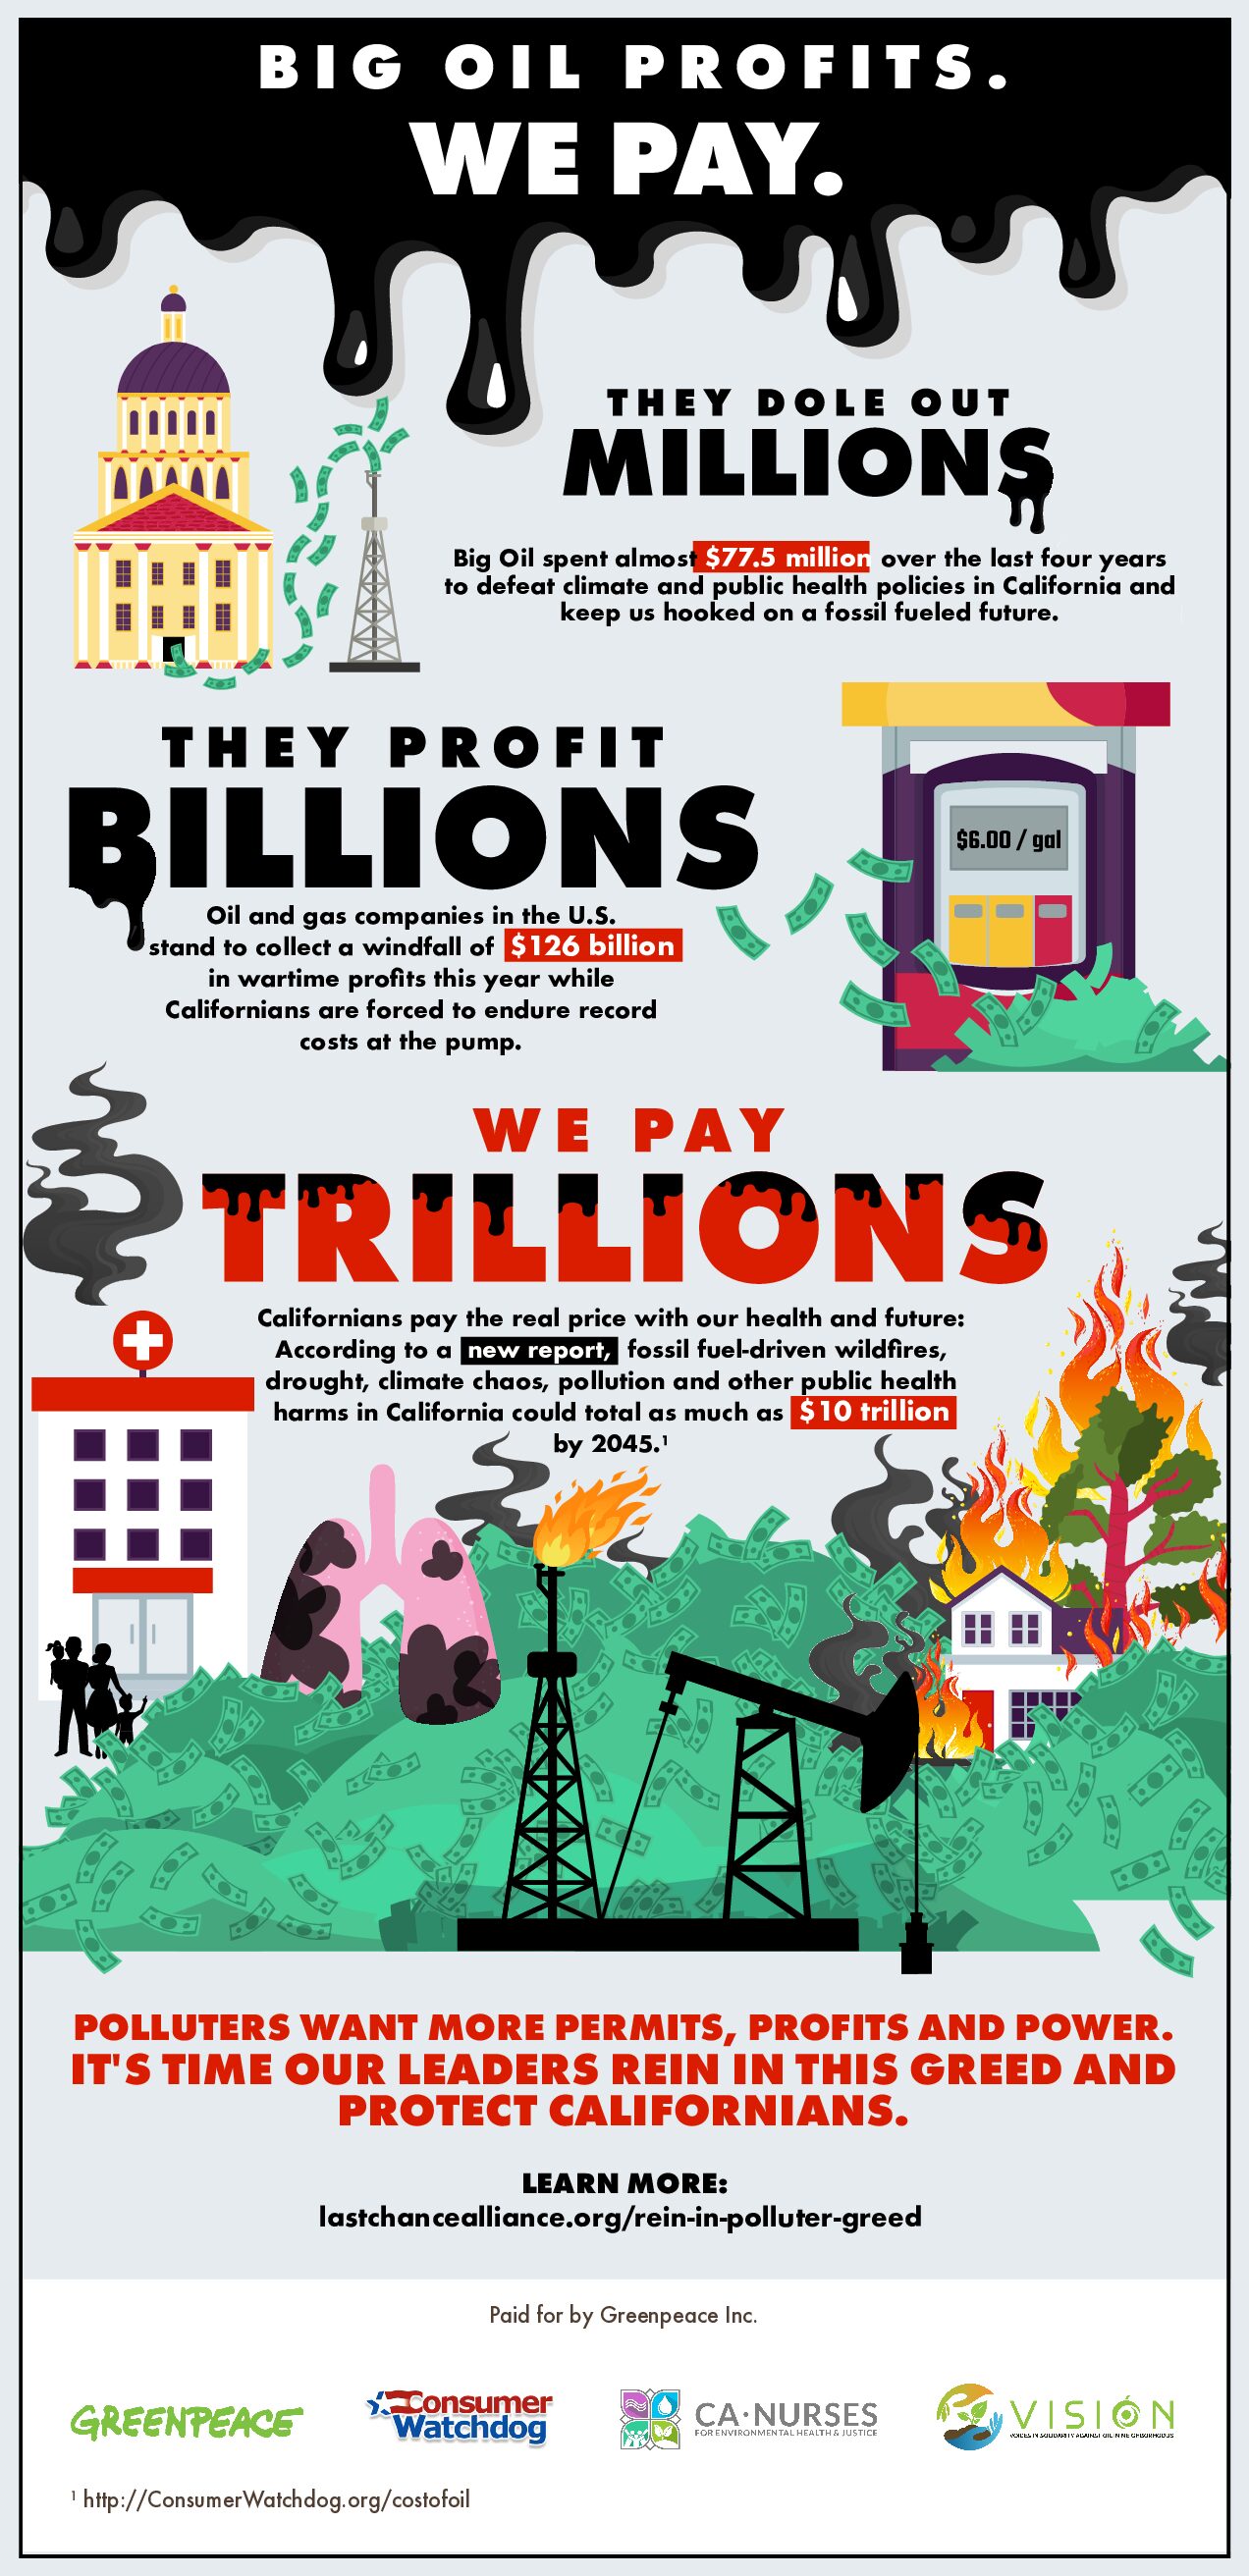 Full page newspaper advertisement that reads “Big Oil Profits. We pay. They dole out millions. They profit Billions. We pay Trillions. Polluters want more permits, profits, and power. It’s time our leaders rein in this greed and protect Californians.